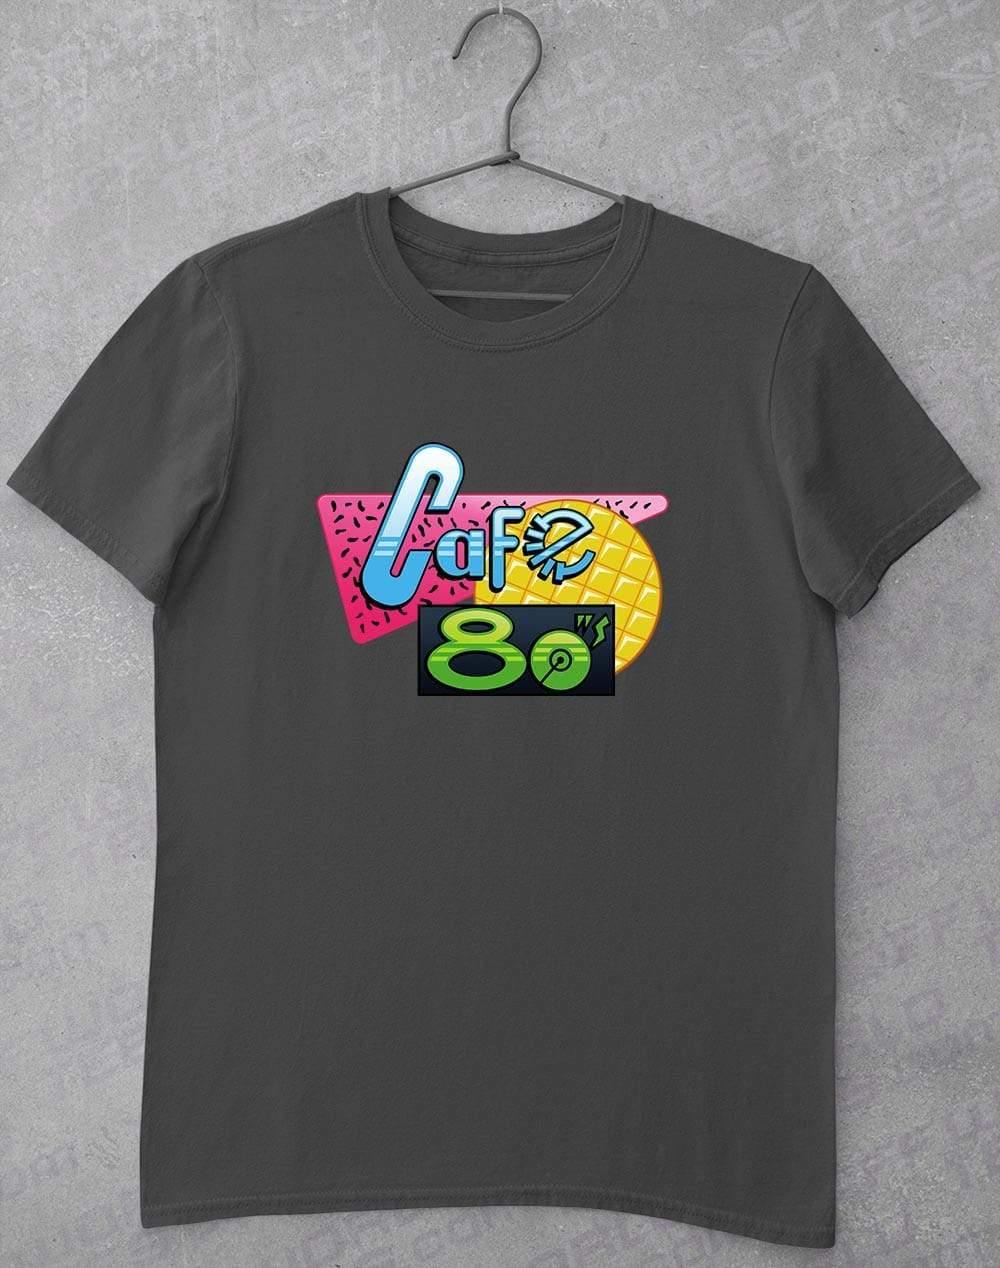 Cafe 80's T-Shirt S / Charcoal  - Off World Tees